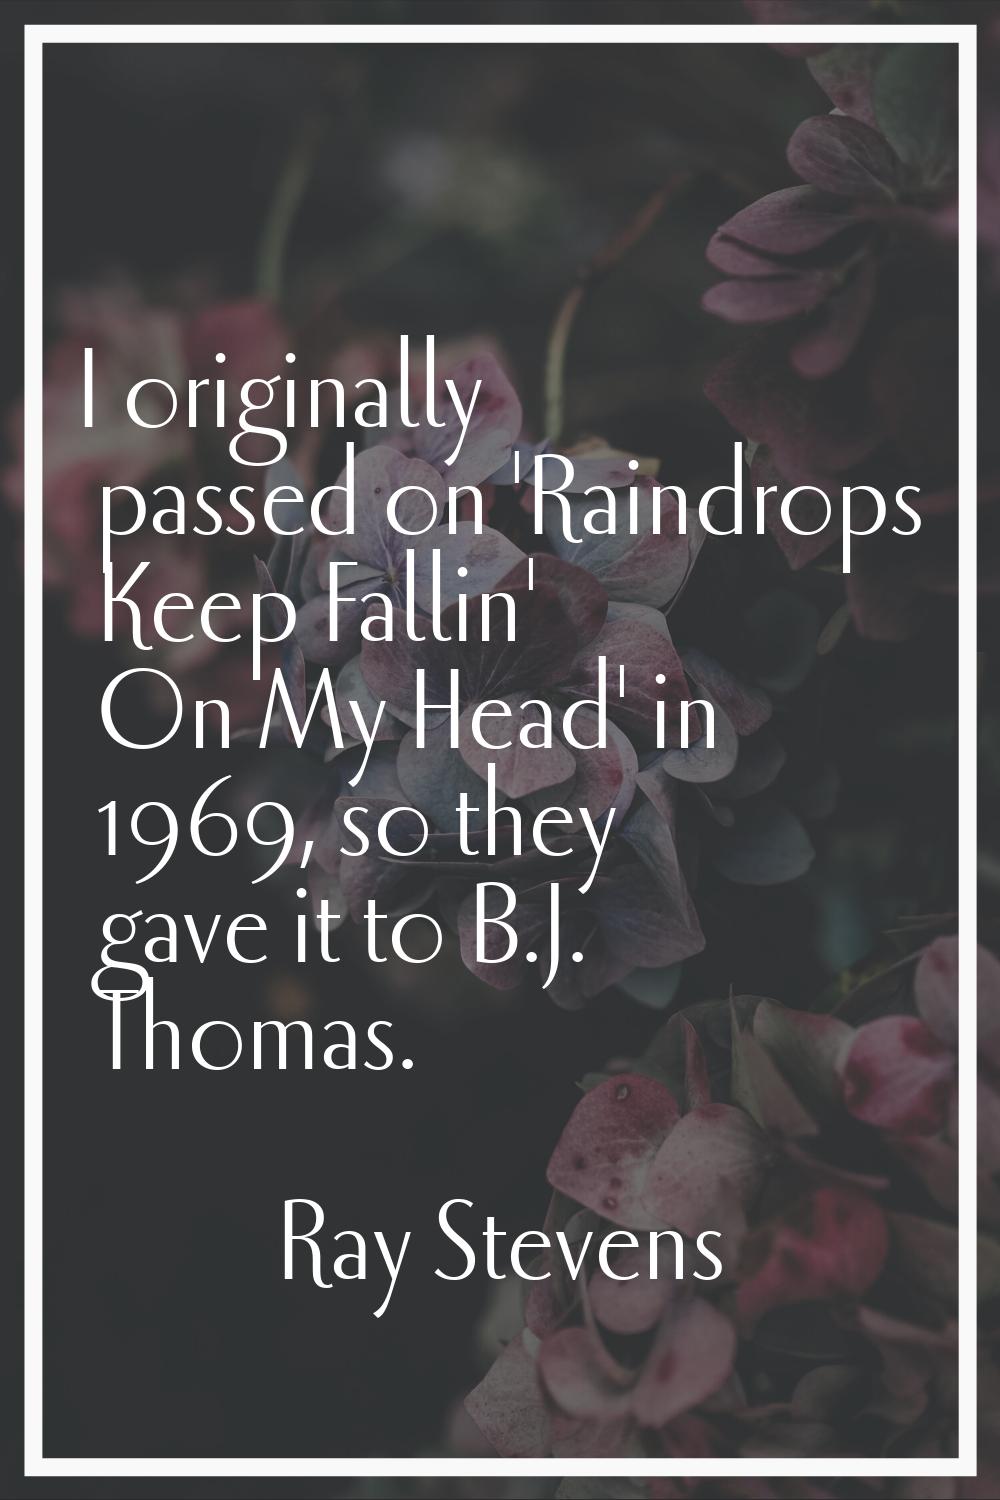 I originally passed on 'Raindrops Keep Fallin' On My Head' in 1969, so they gave it to B.J. Thomas.